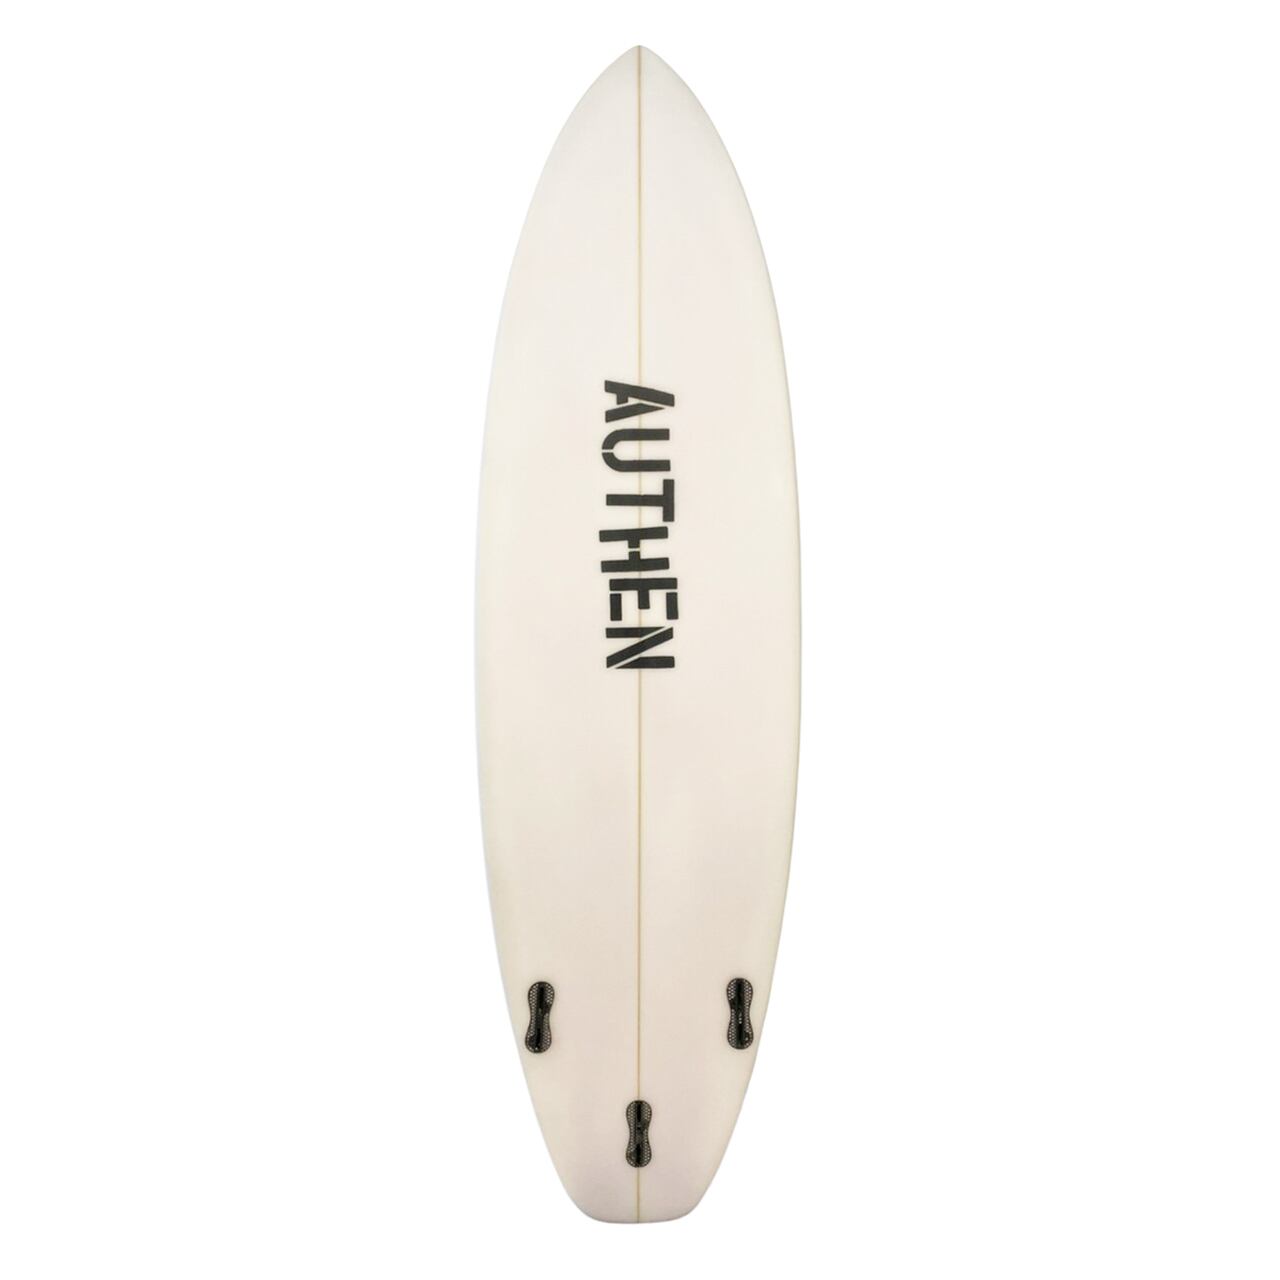 Authen surfboards “ Hp ” model Squash tail 5`8``× 18`9/16`` × 2`1 